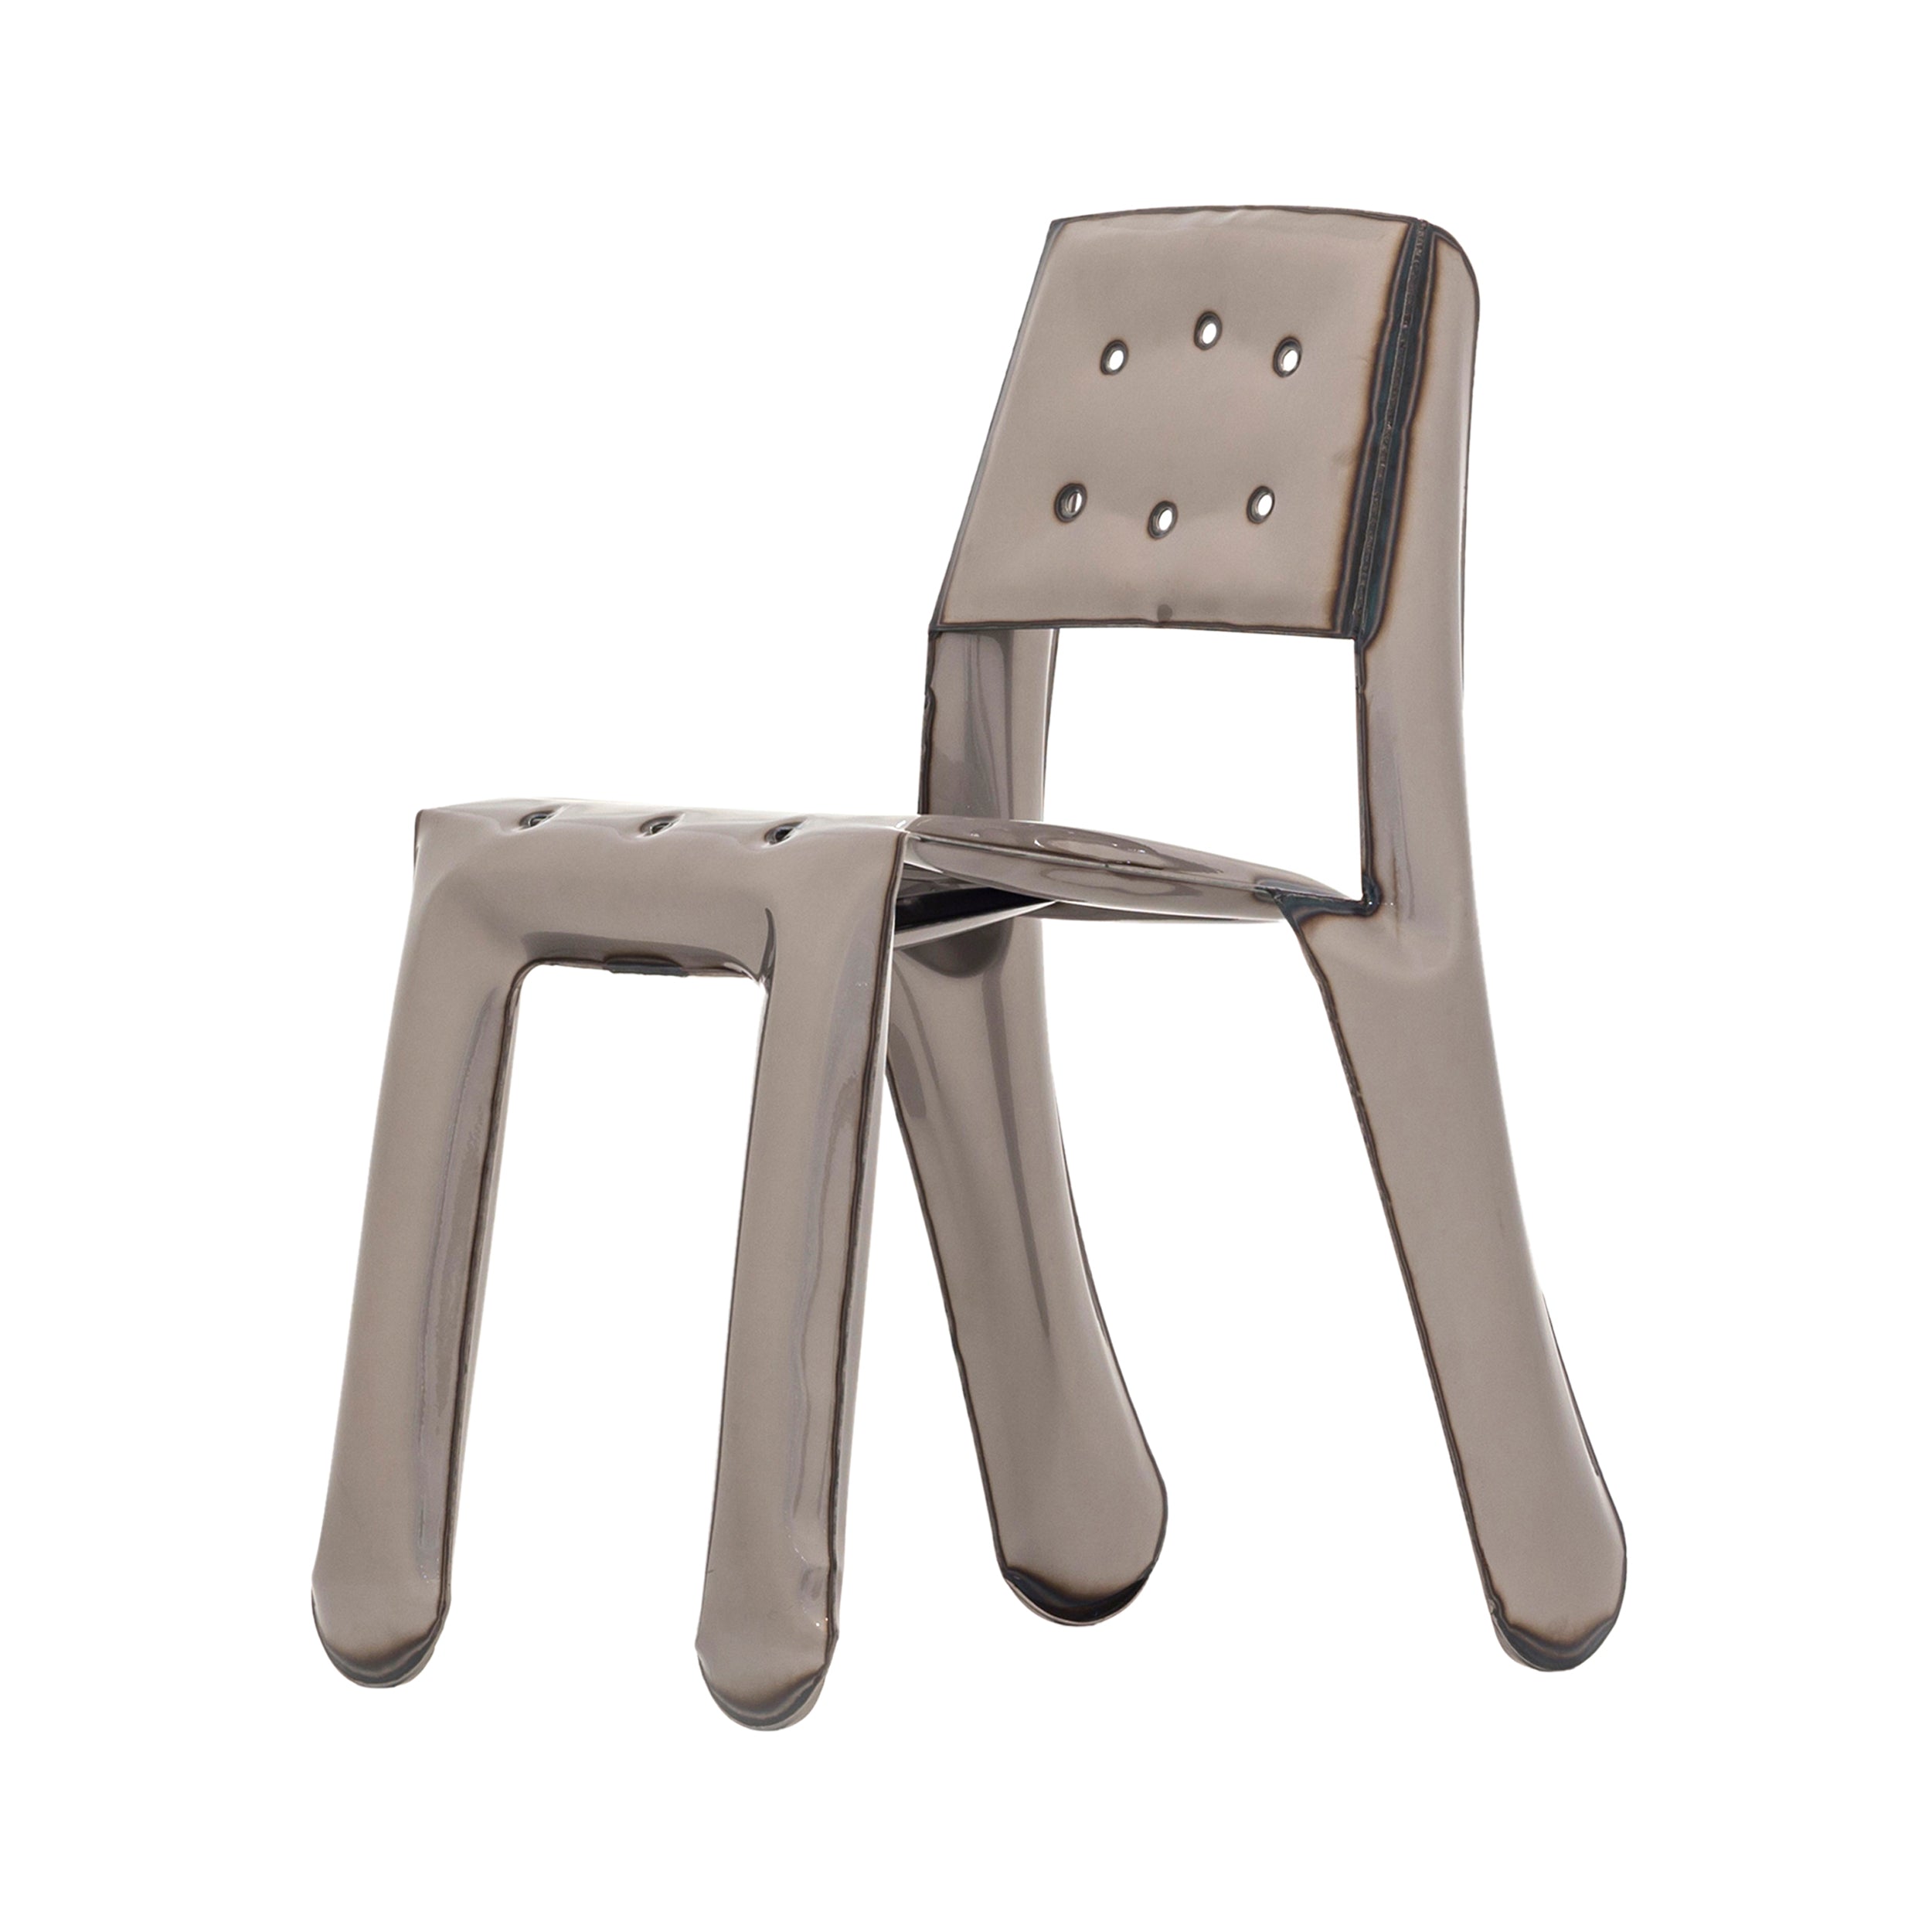 Chippensteel 0.5 Chair: Raw Steel Lacquered Carbon Steel